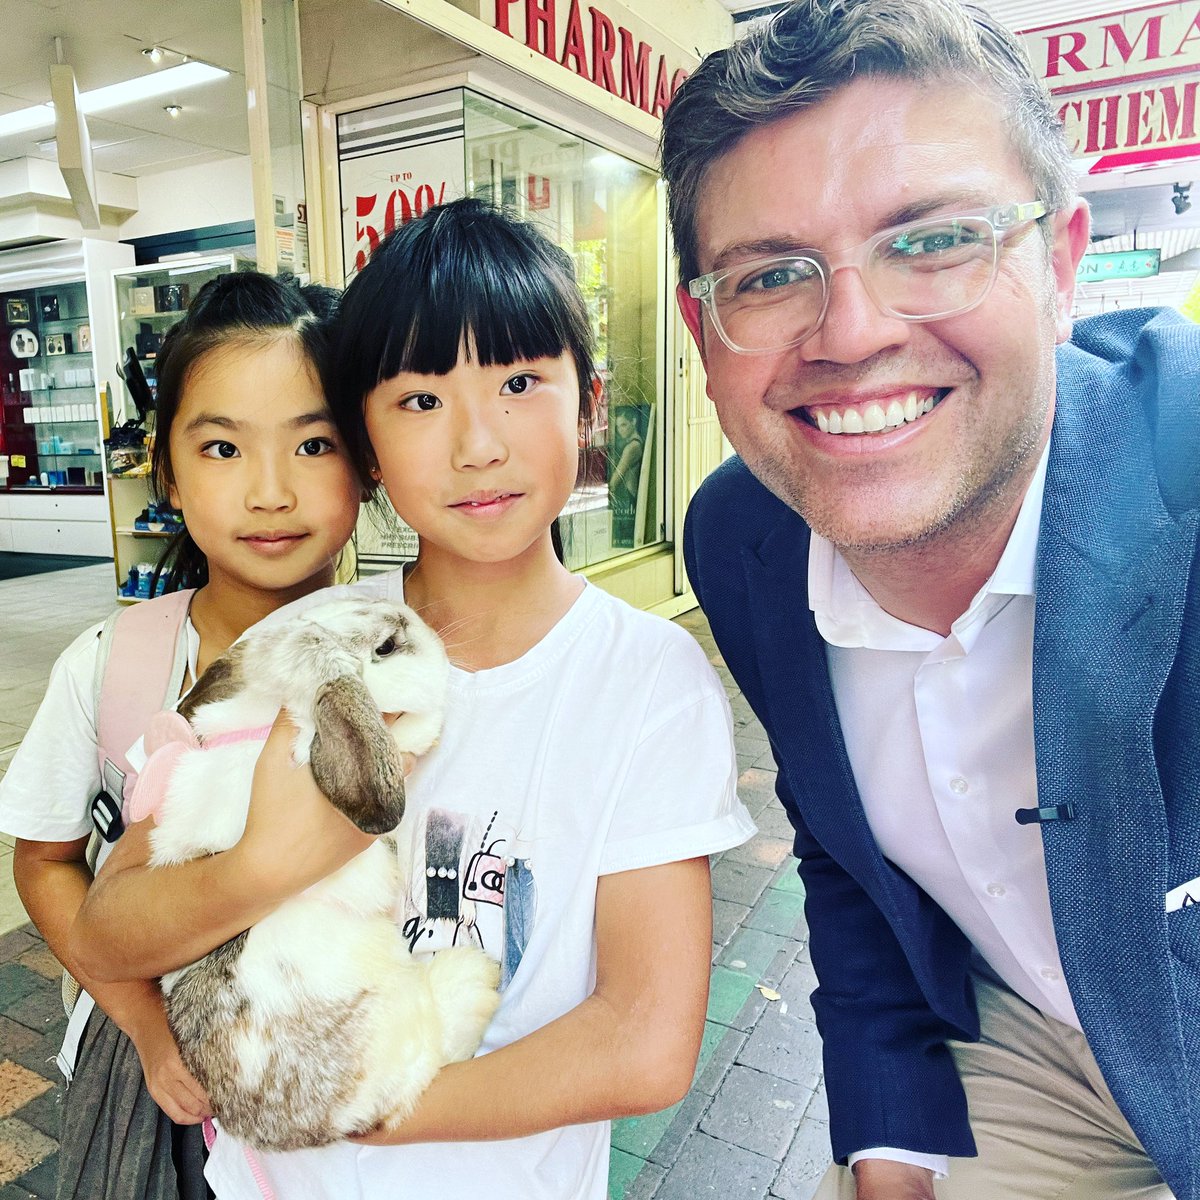 Jerome Laxale MP: These lovely girls brought their pet rabbit Maximus down to #East…